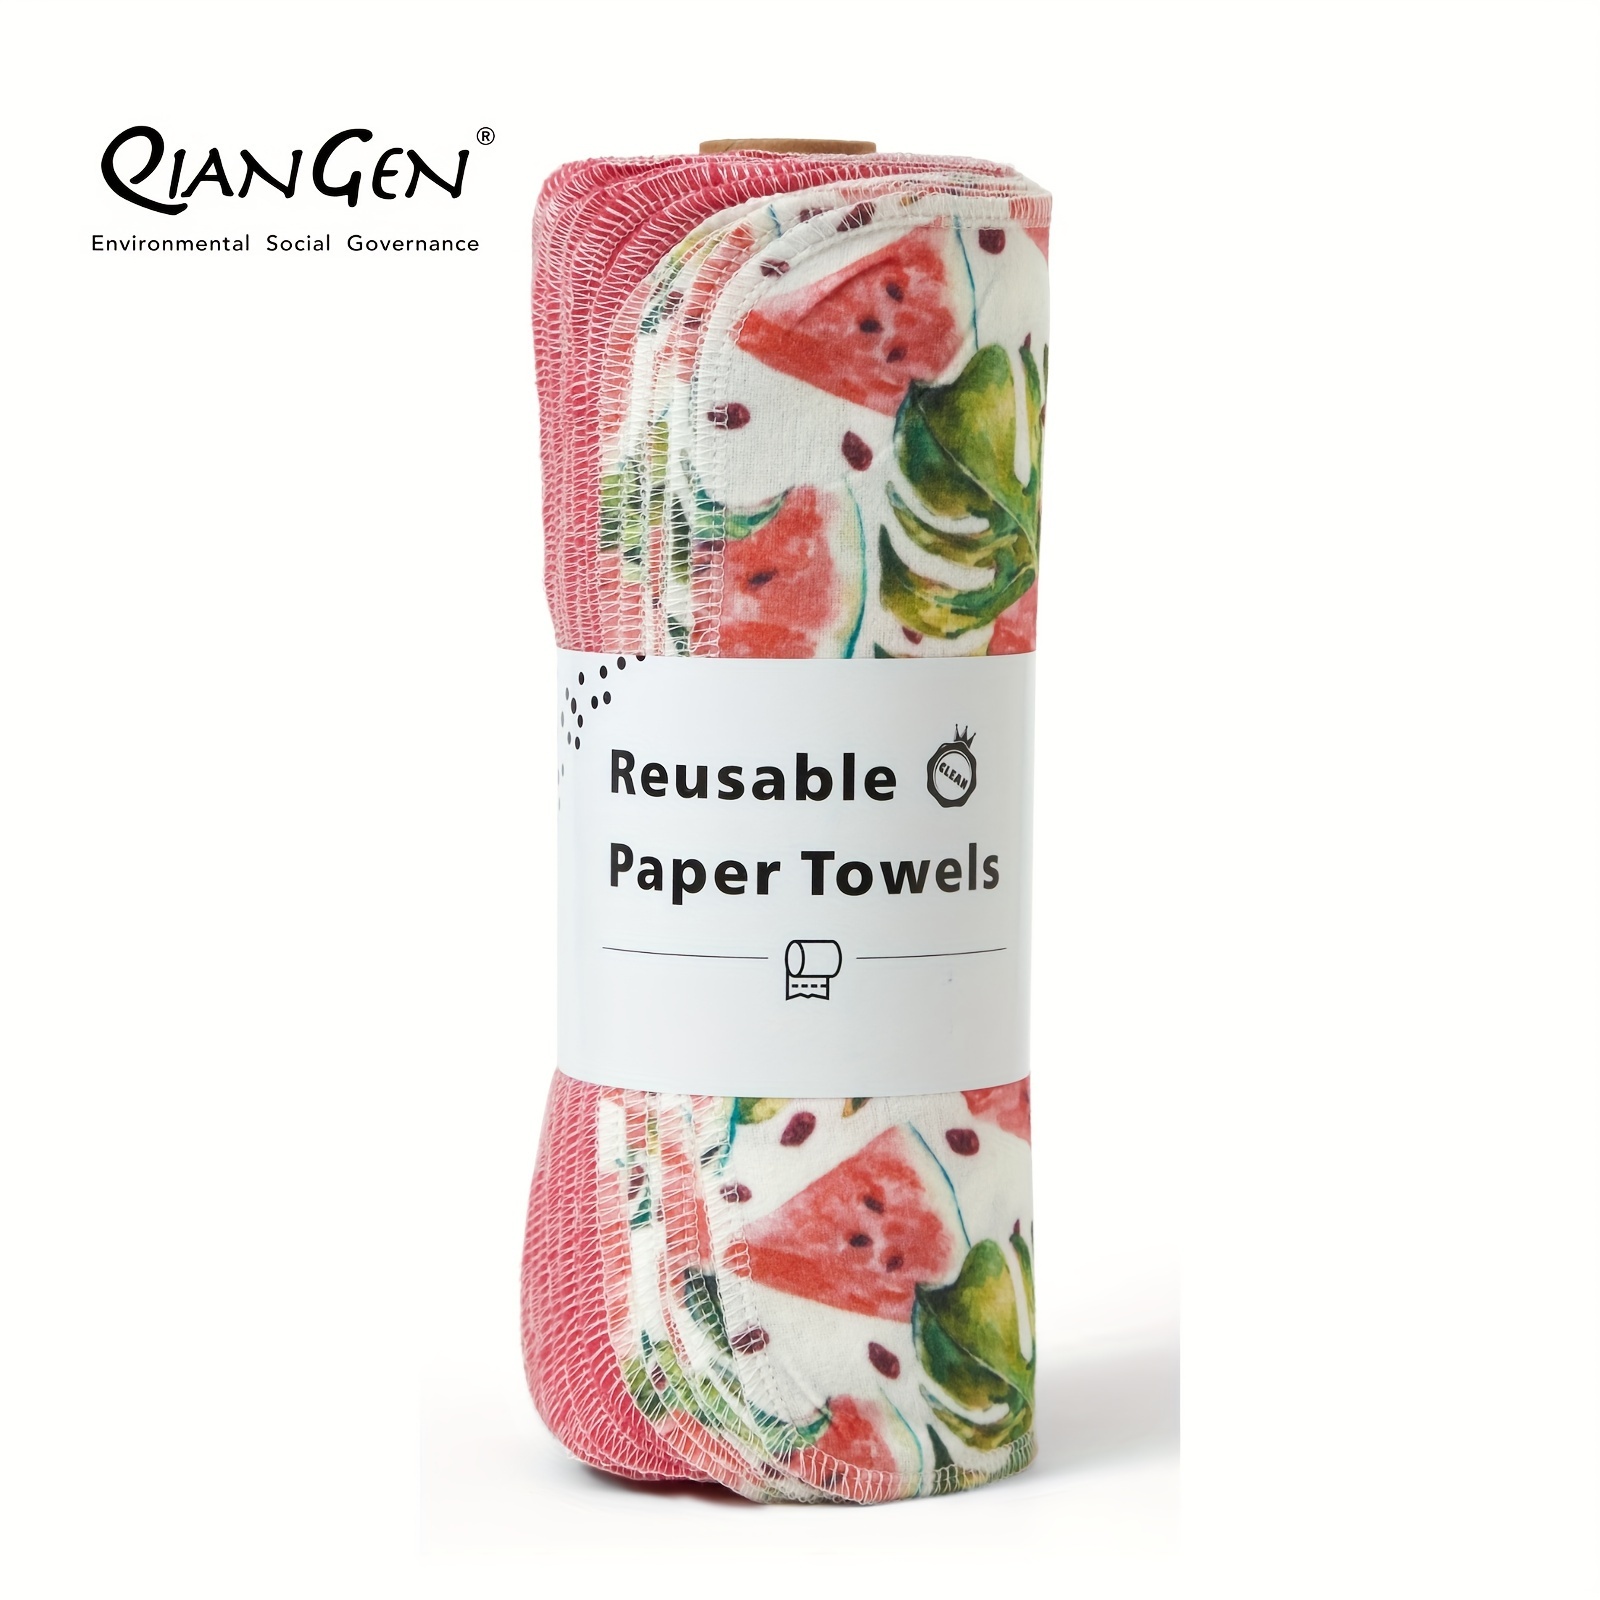 Reusable Paper Towels Washable | Bamboo Cellulose Fiber, Nature Friendly  Paper Towels | Thick, Strong, Paperless Kitchen Roll | Reusable Napkins 